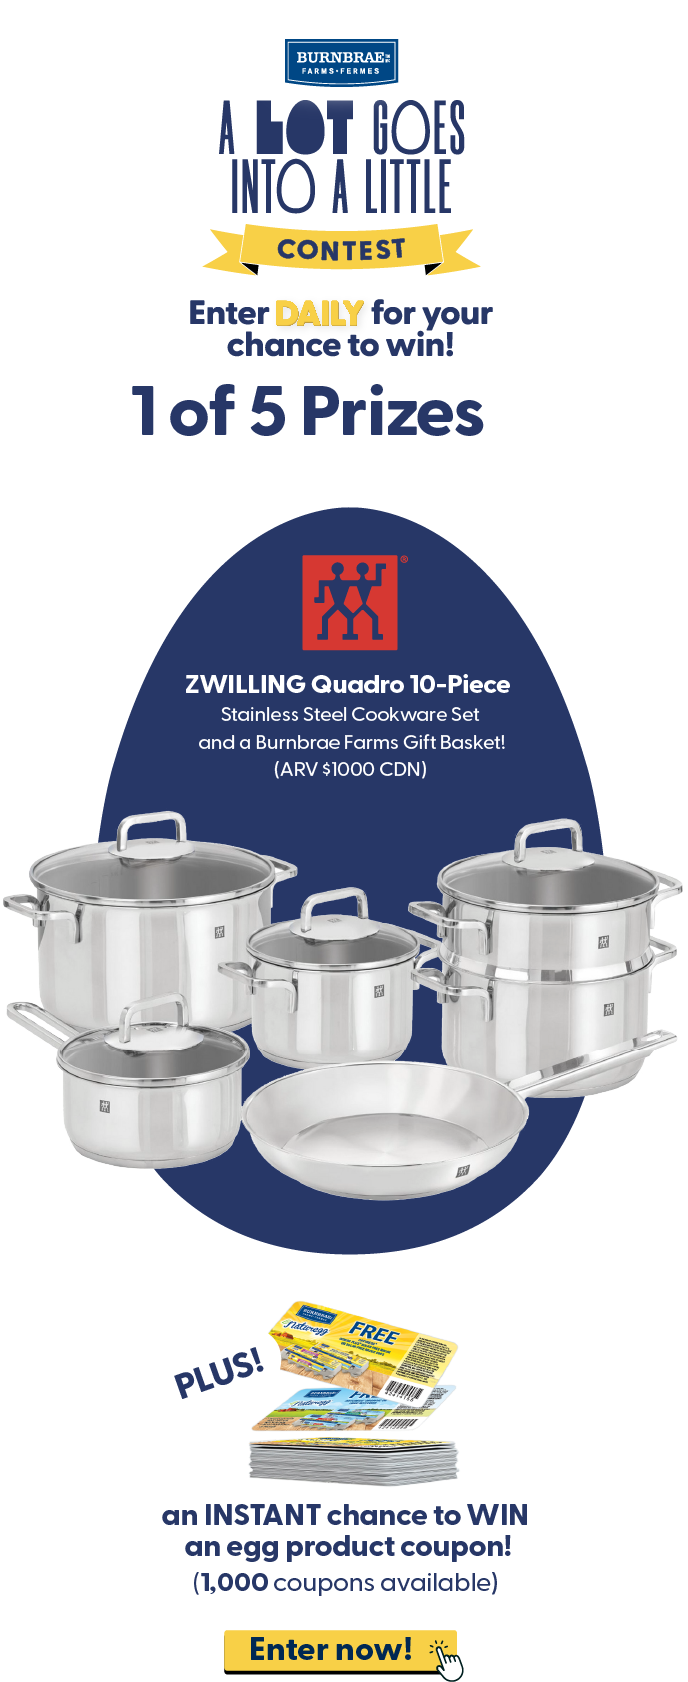 Enter DAILY for your chance to win! 1 of 5 Prizes ZWILLING Quadro 10-Piece Stainless Steel Cookware Set and a Burnbrae Farms Gift Basket! (ARV $1000 CDN) Plus an INSTANT chance to WIN an egg product coupon! (1,000 coupons available). Enter now